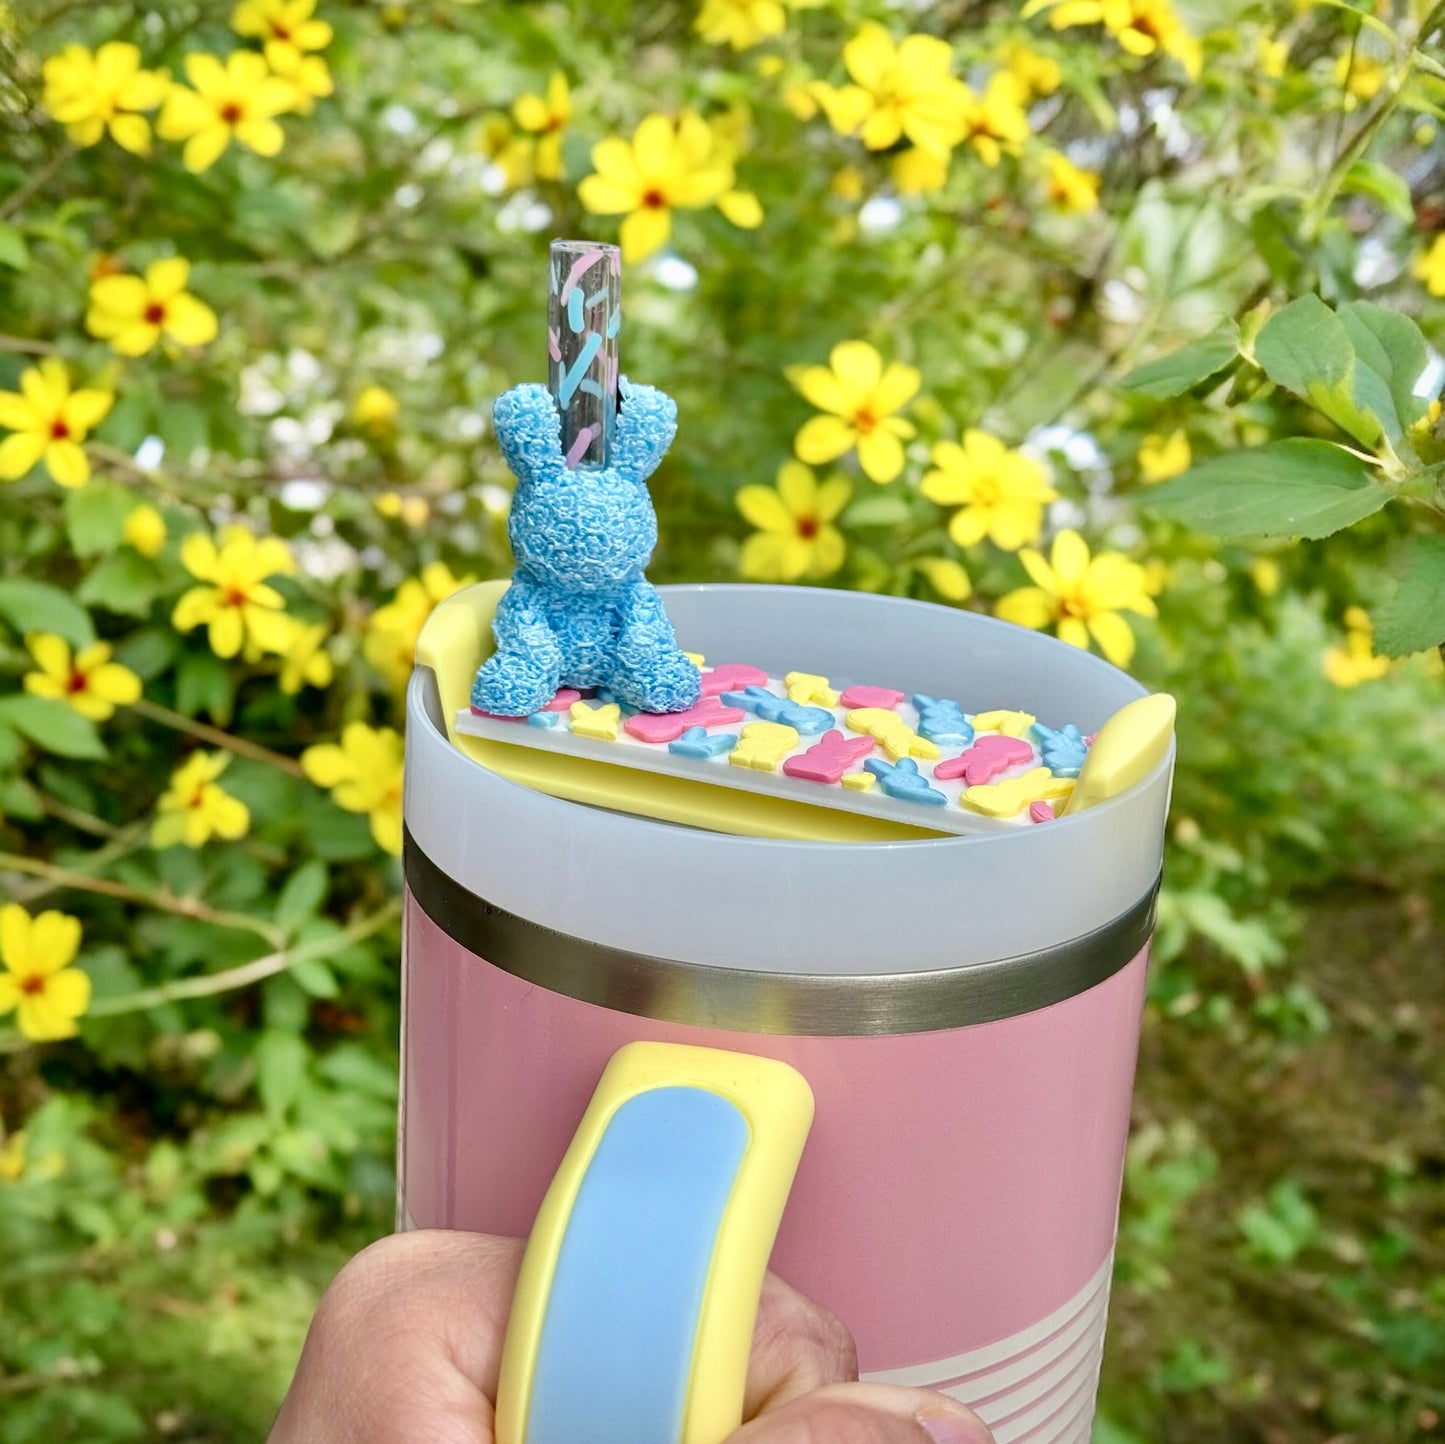 LIMITED EDITION Pastel Pop Peep Bunnies Lid Topper, Straw Topper, and Matching Sprinkles Straw Set